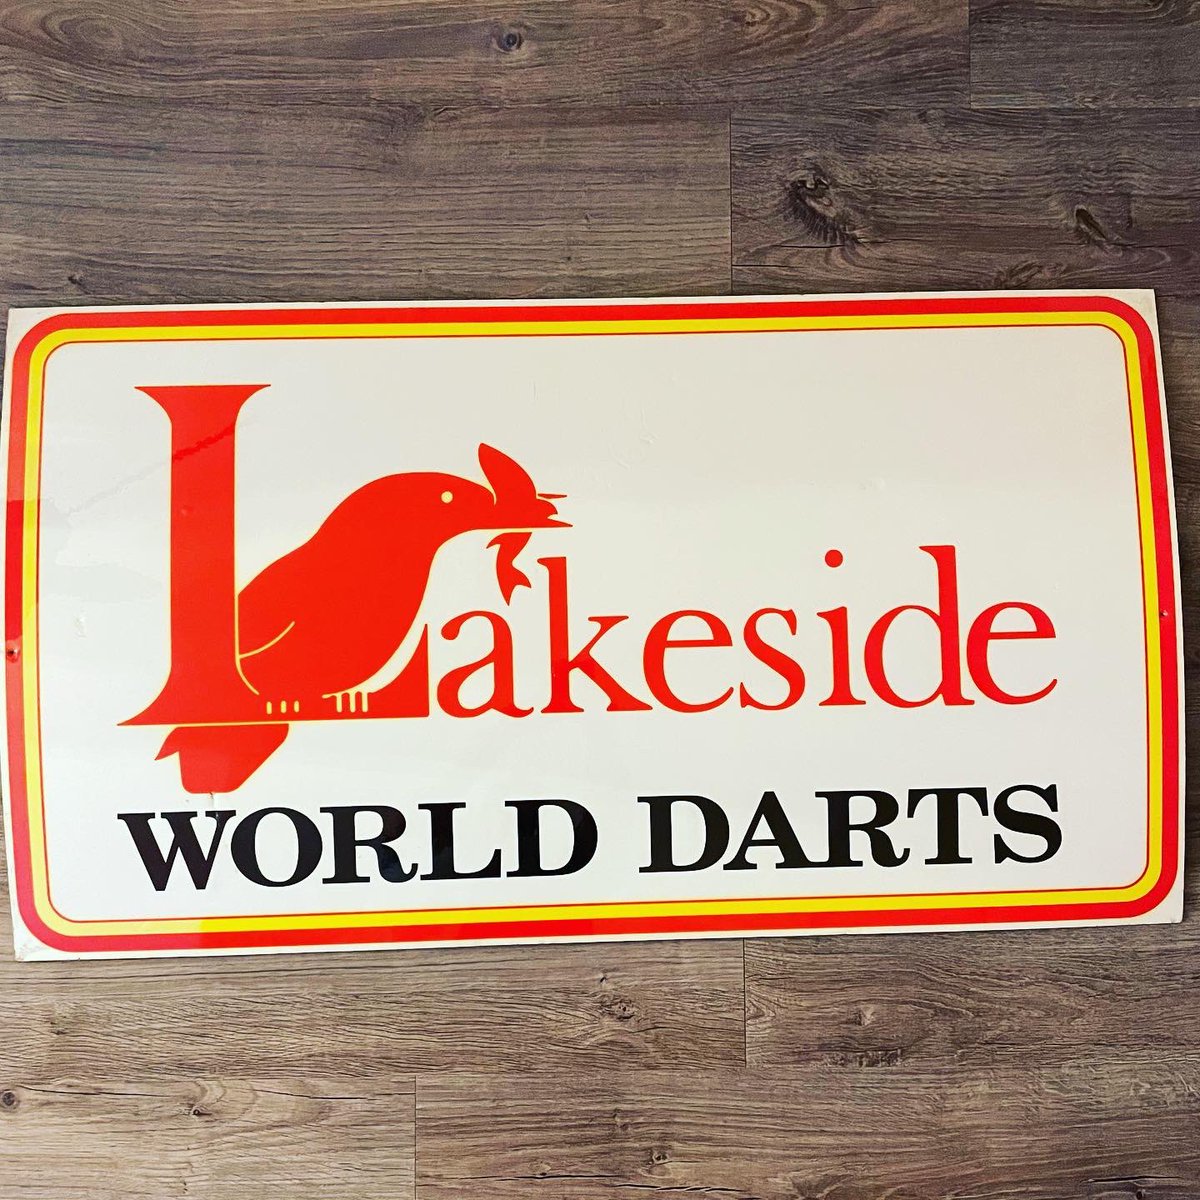 anyone interested?

The sizes are about 105cm/66cm

Historical plates. The possibility to ship them overseas is available. 

#Embassy #lakeside #history #darts #legends #moments #instadarts #getitdarts #youwantitwegetit